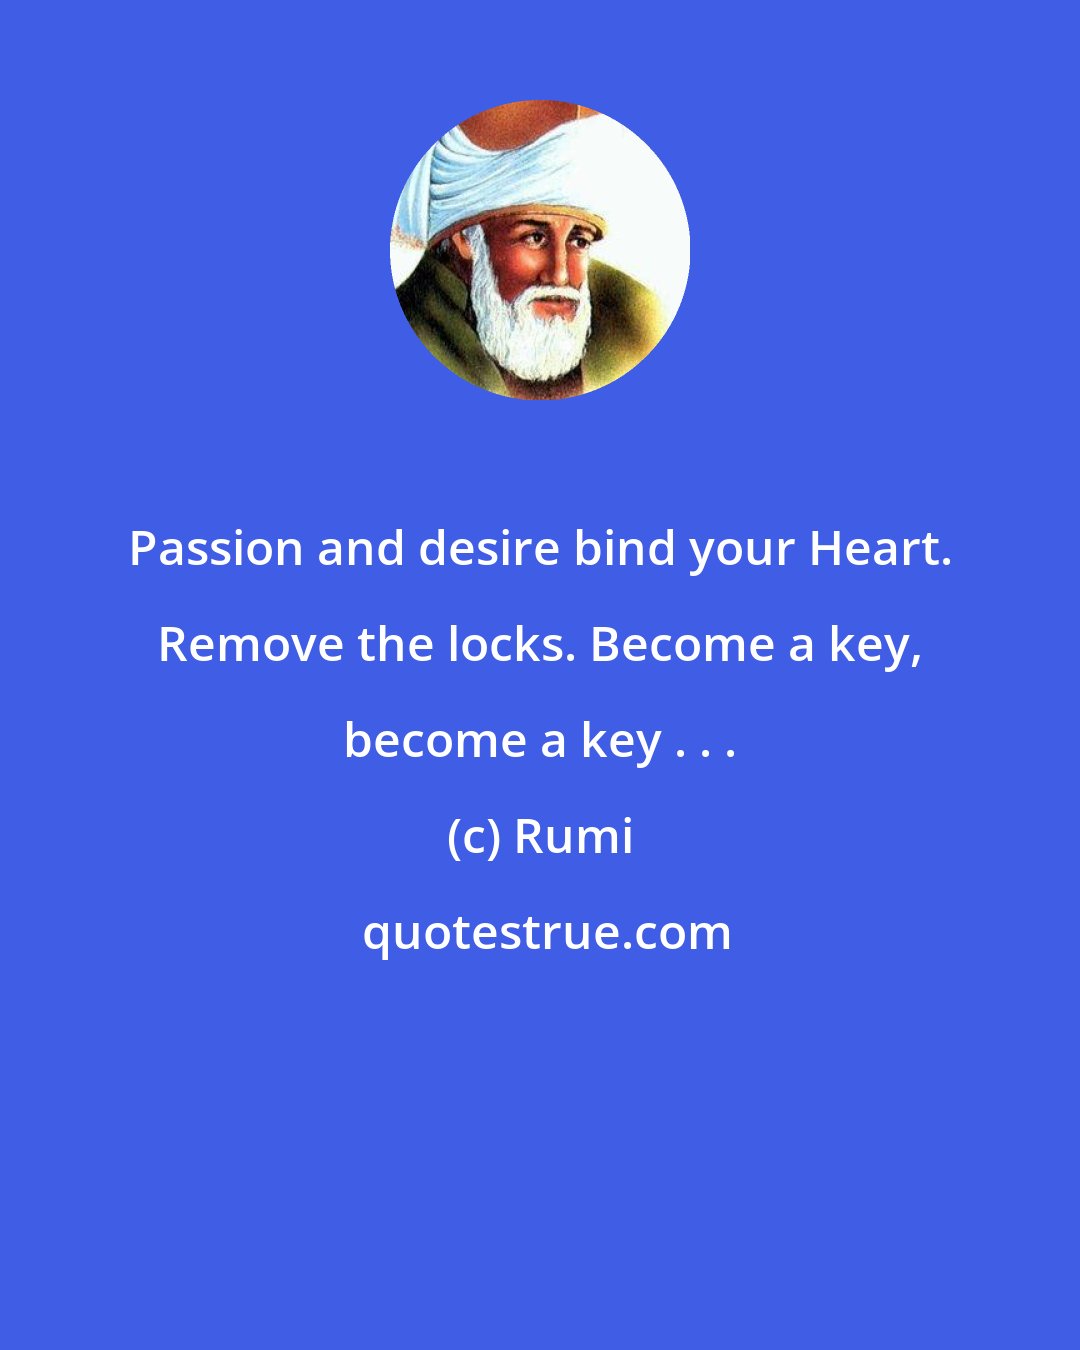 Rumi: Passion and desire bind your Heart. Remove the locks. Become a key, become a key . . .